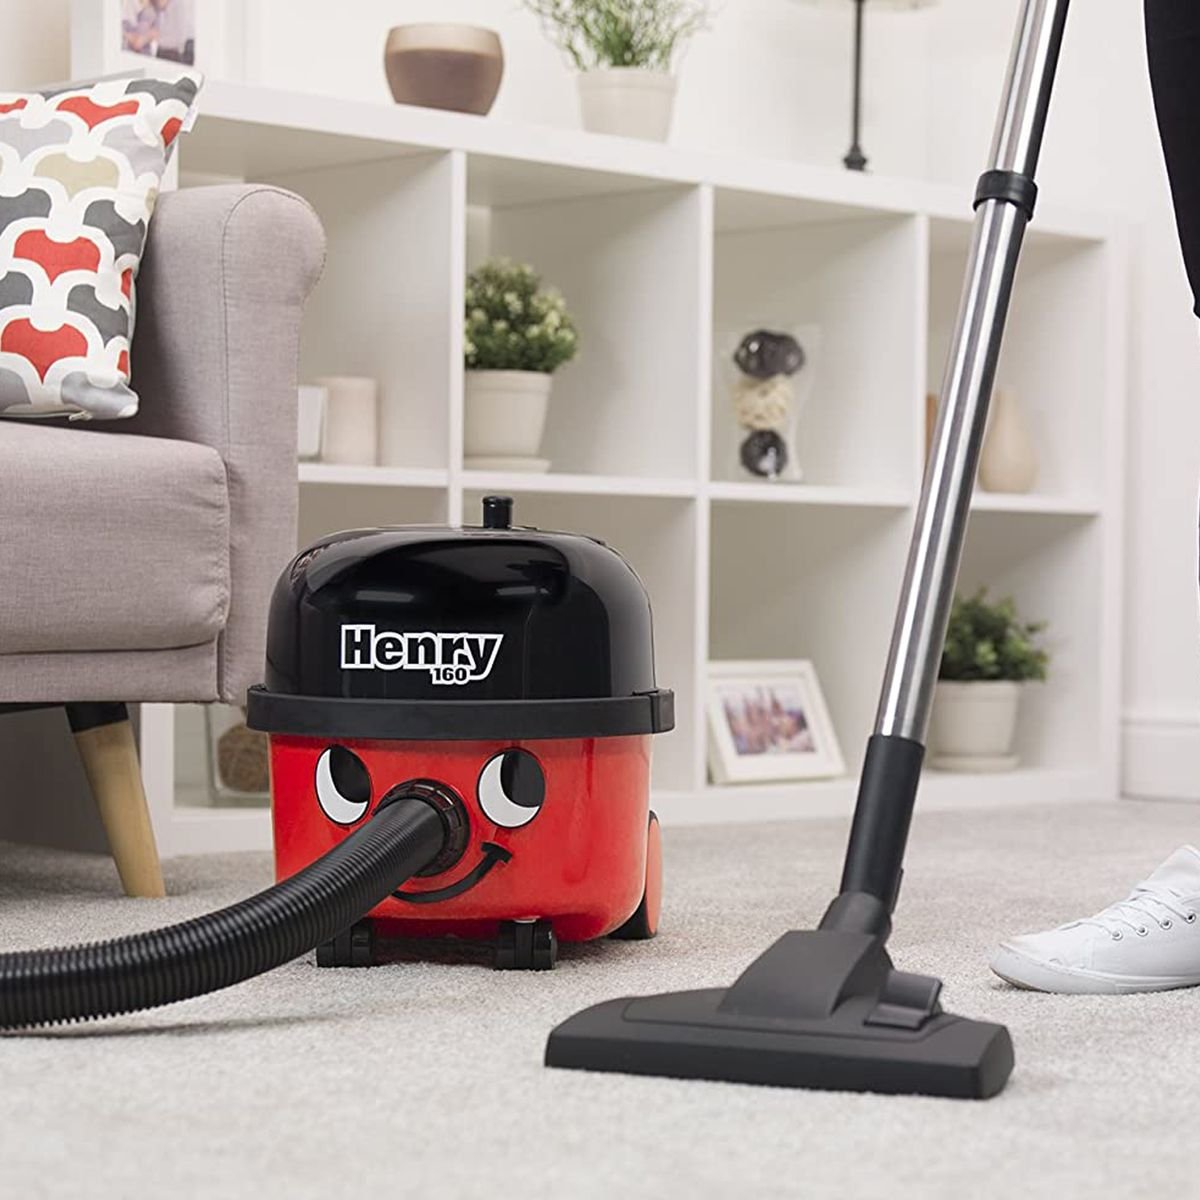 Why do professional cleaners use Henry vacuums? We tested one to find out